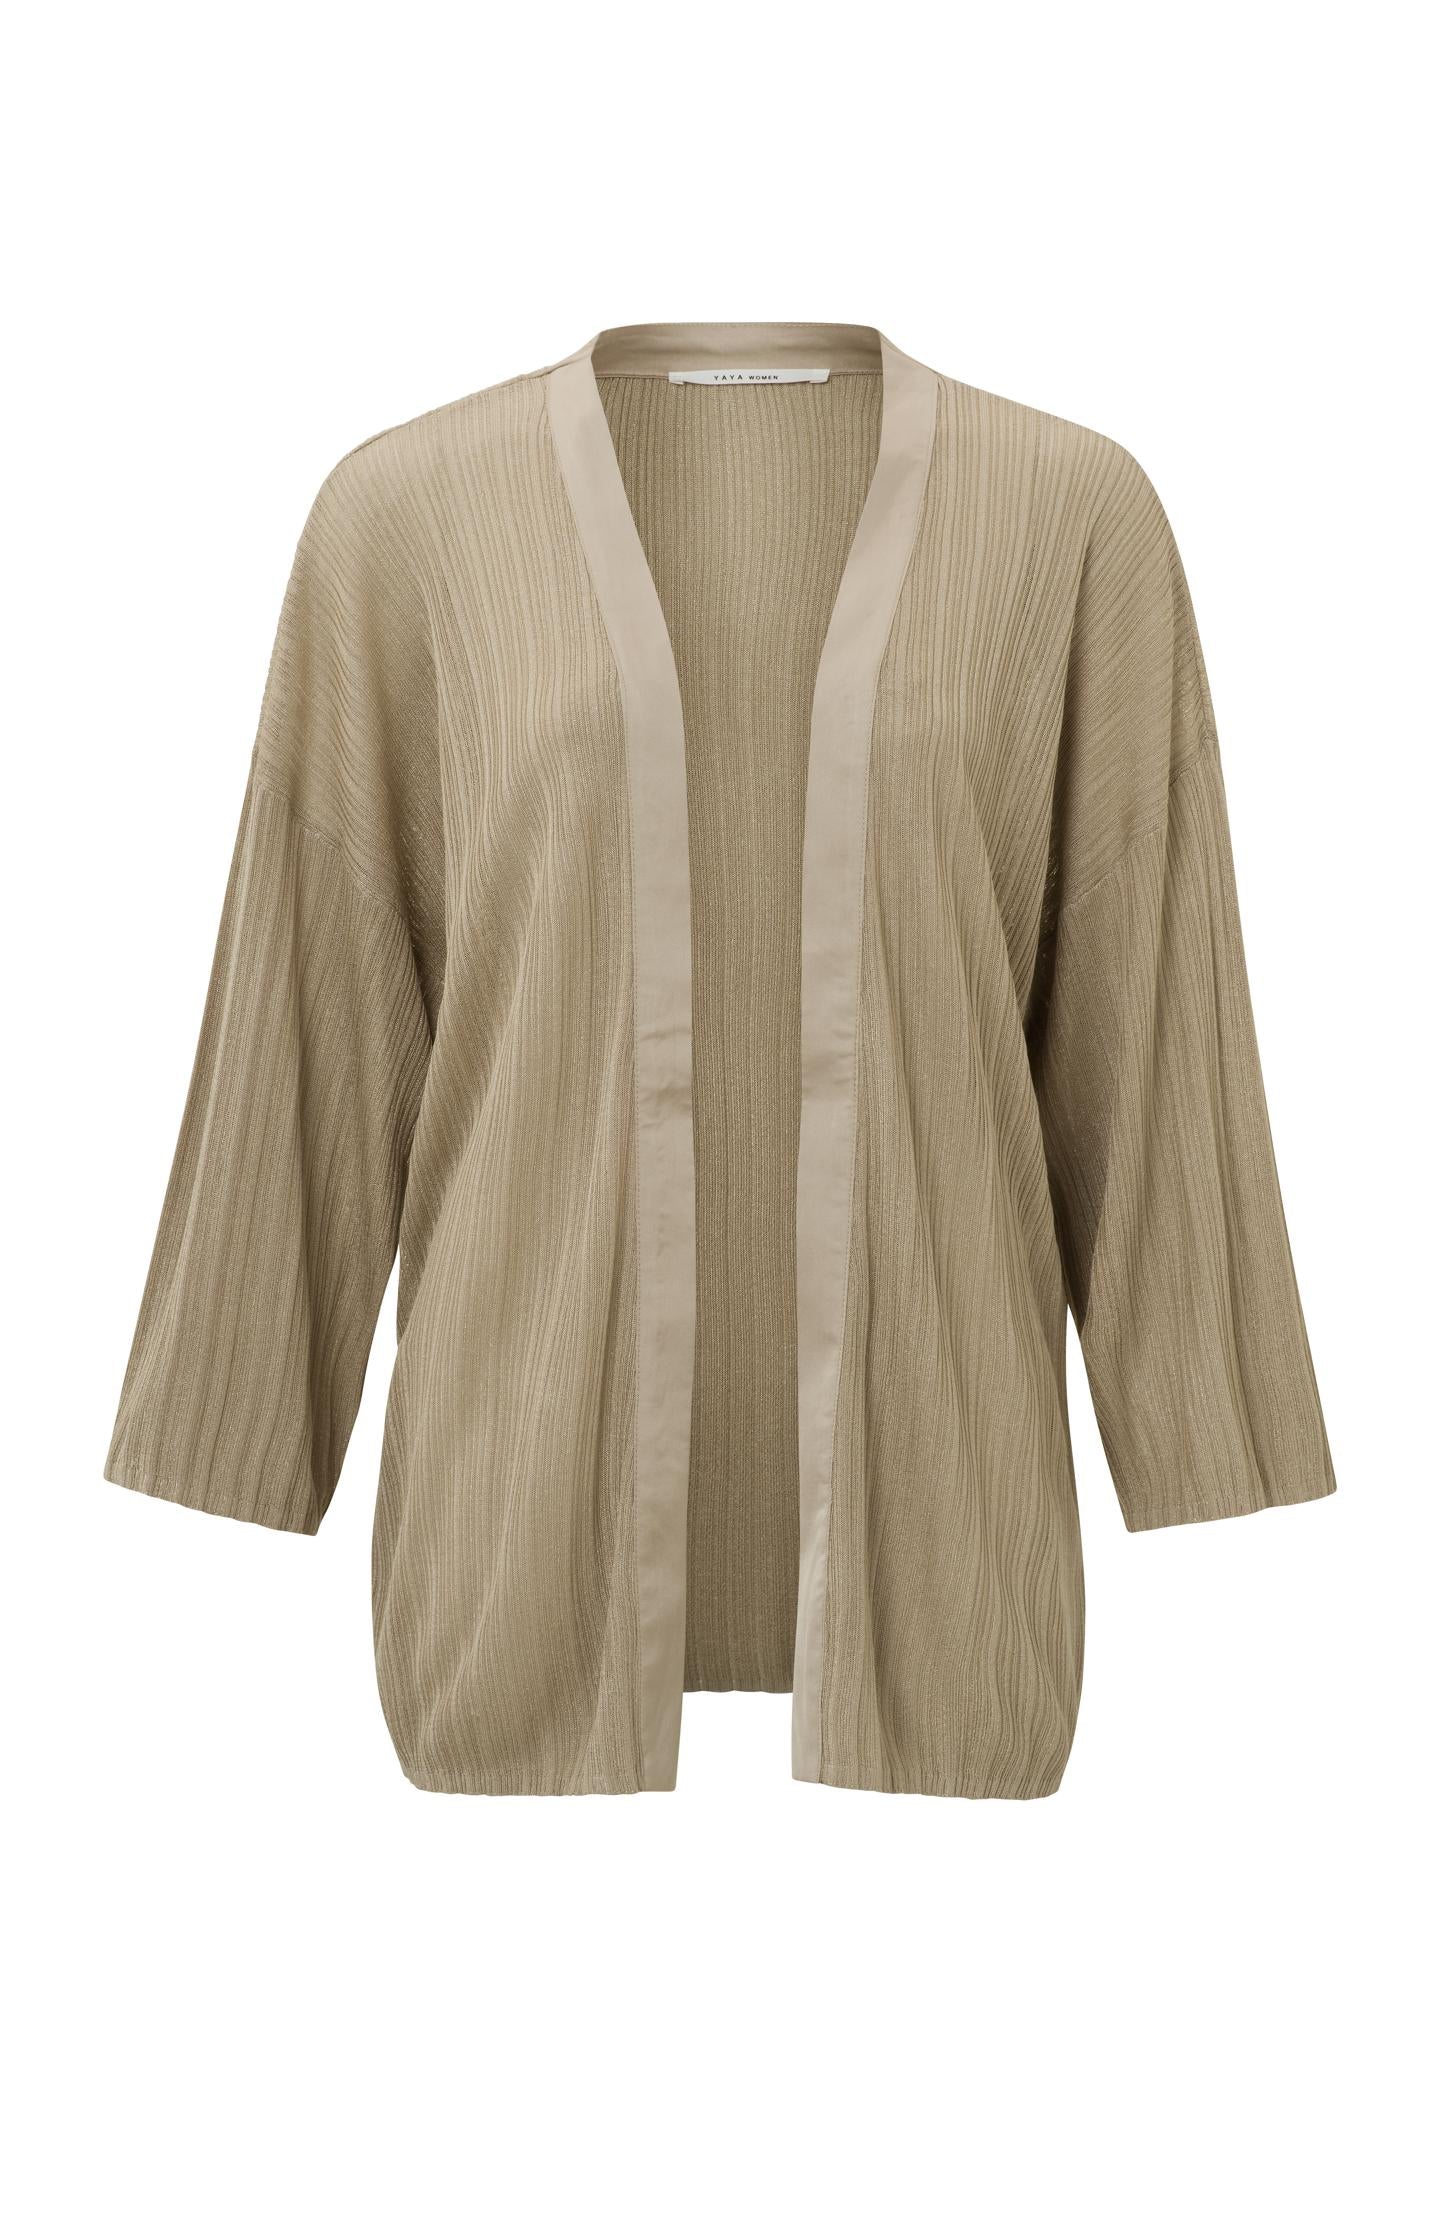 Ribbed kimono with 7/8 sleeves and dropped shoulder seams - Type: product